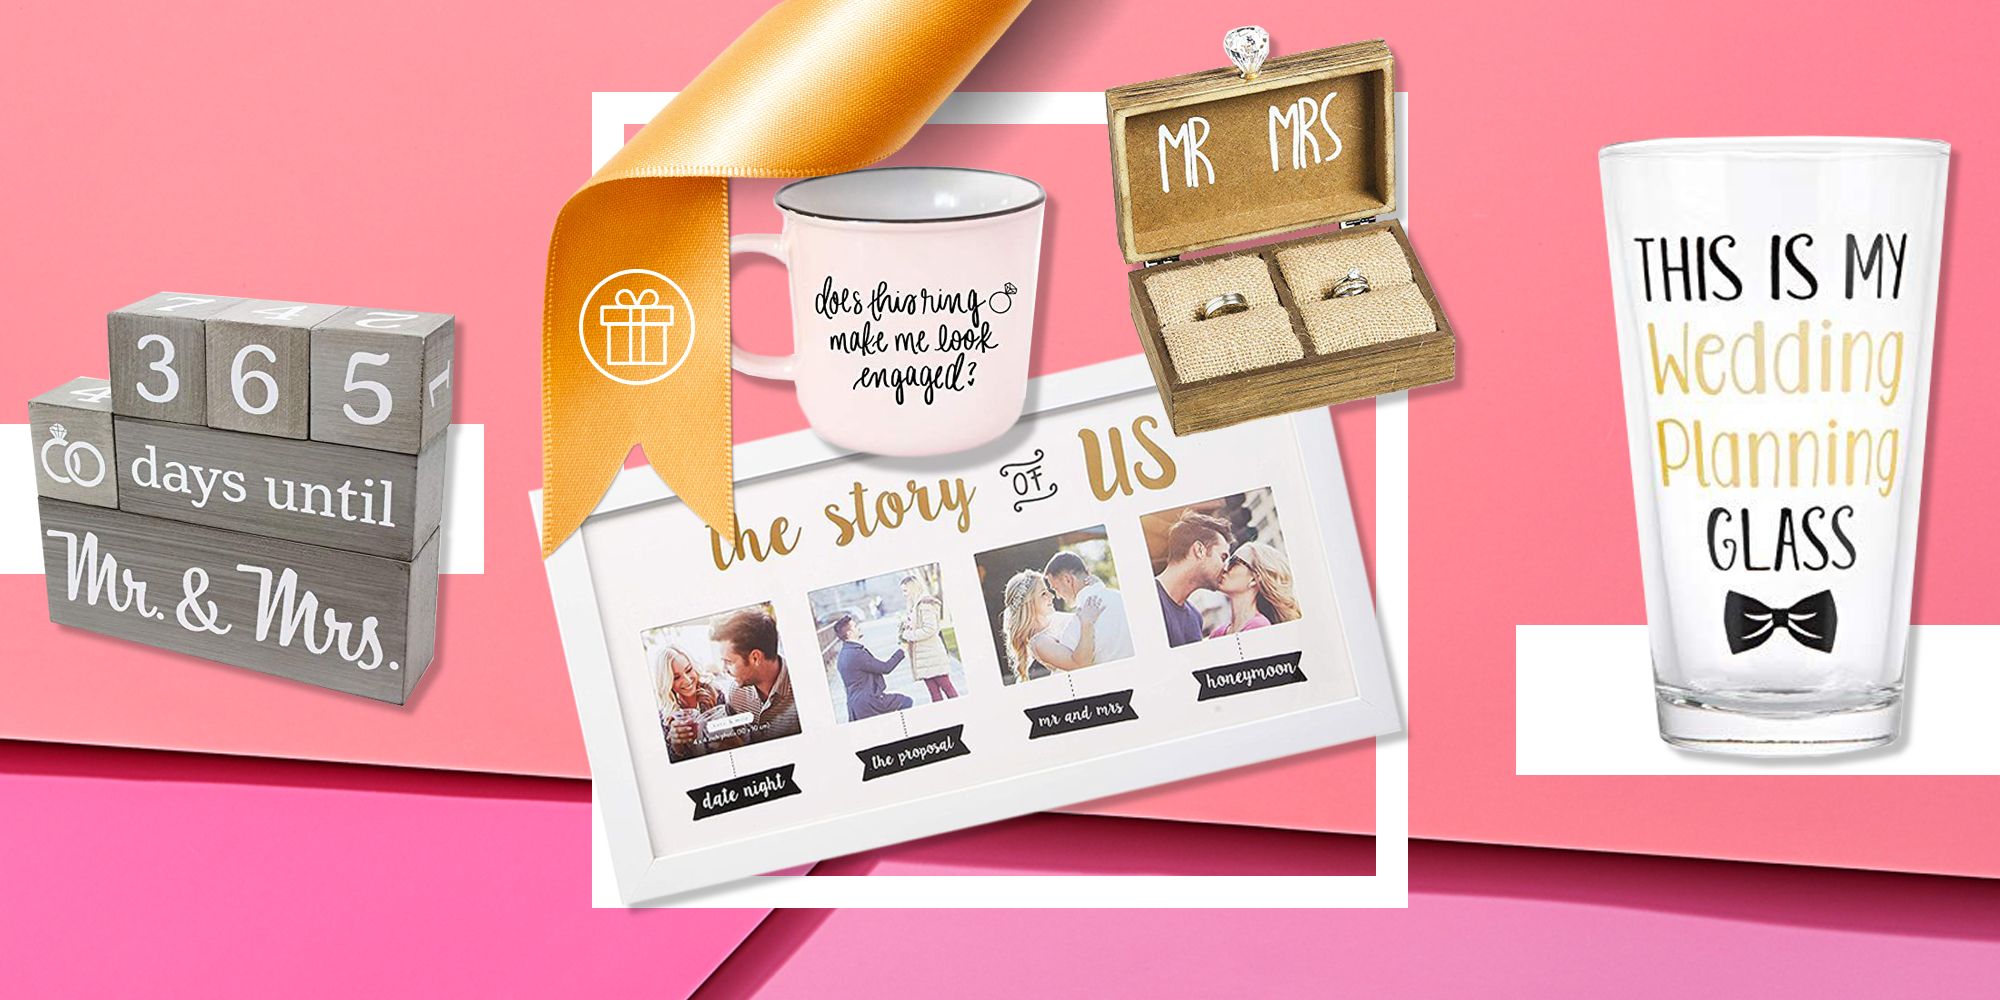 37 Best Gifts For An Engagement  Ideas For Engagement Gifts